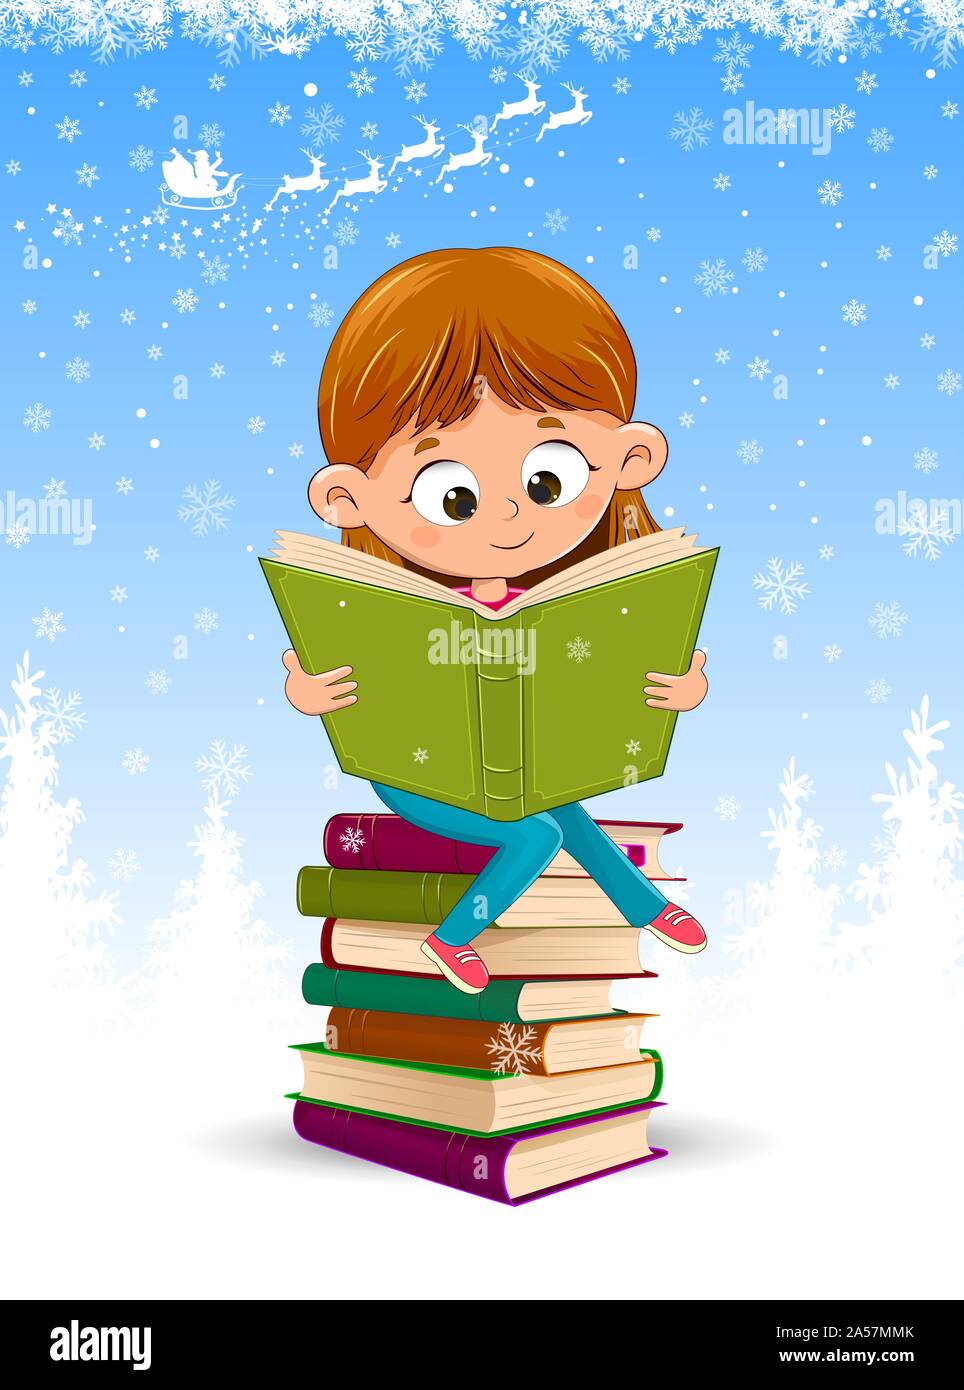 Little girl is reading a book for Christmas. Baby girl sitting on a stack of books. Winter background with snowflakes. Stock Vector